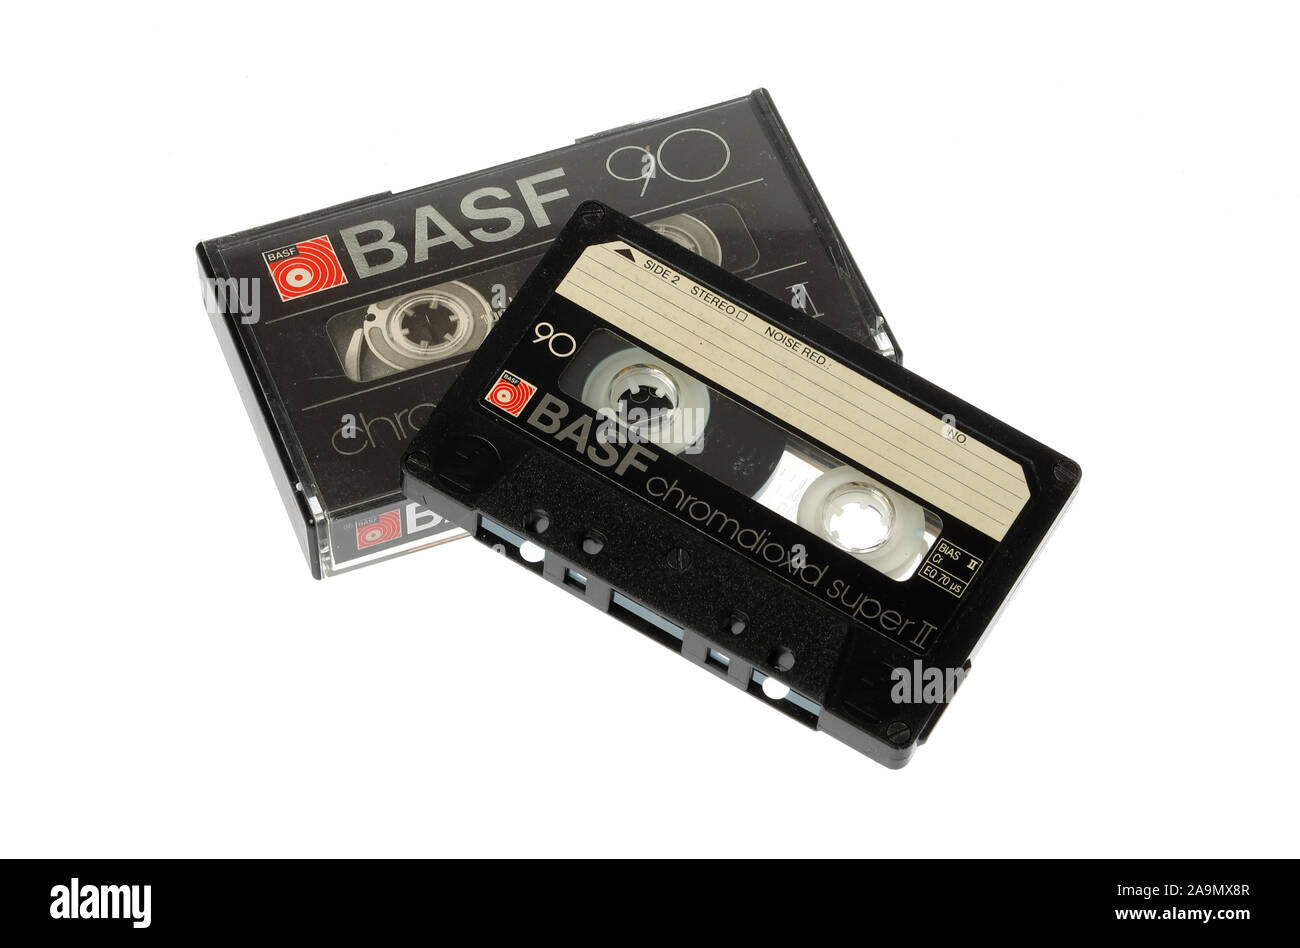 Stockholm, Sweden - November 12, 2019: One BASF chromdioxid audio compact cassette tape with its box from the 1980s era isolated on white background. Stock Photo